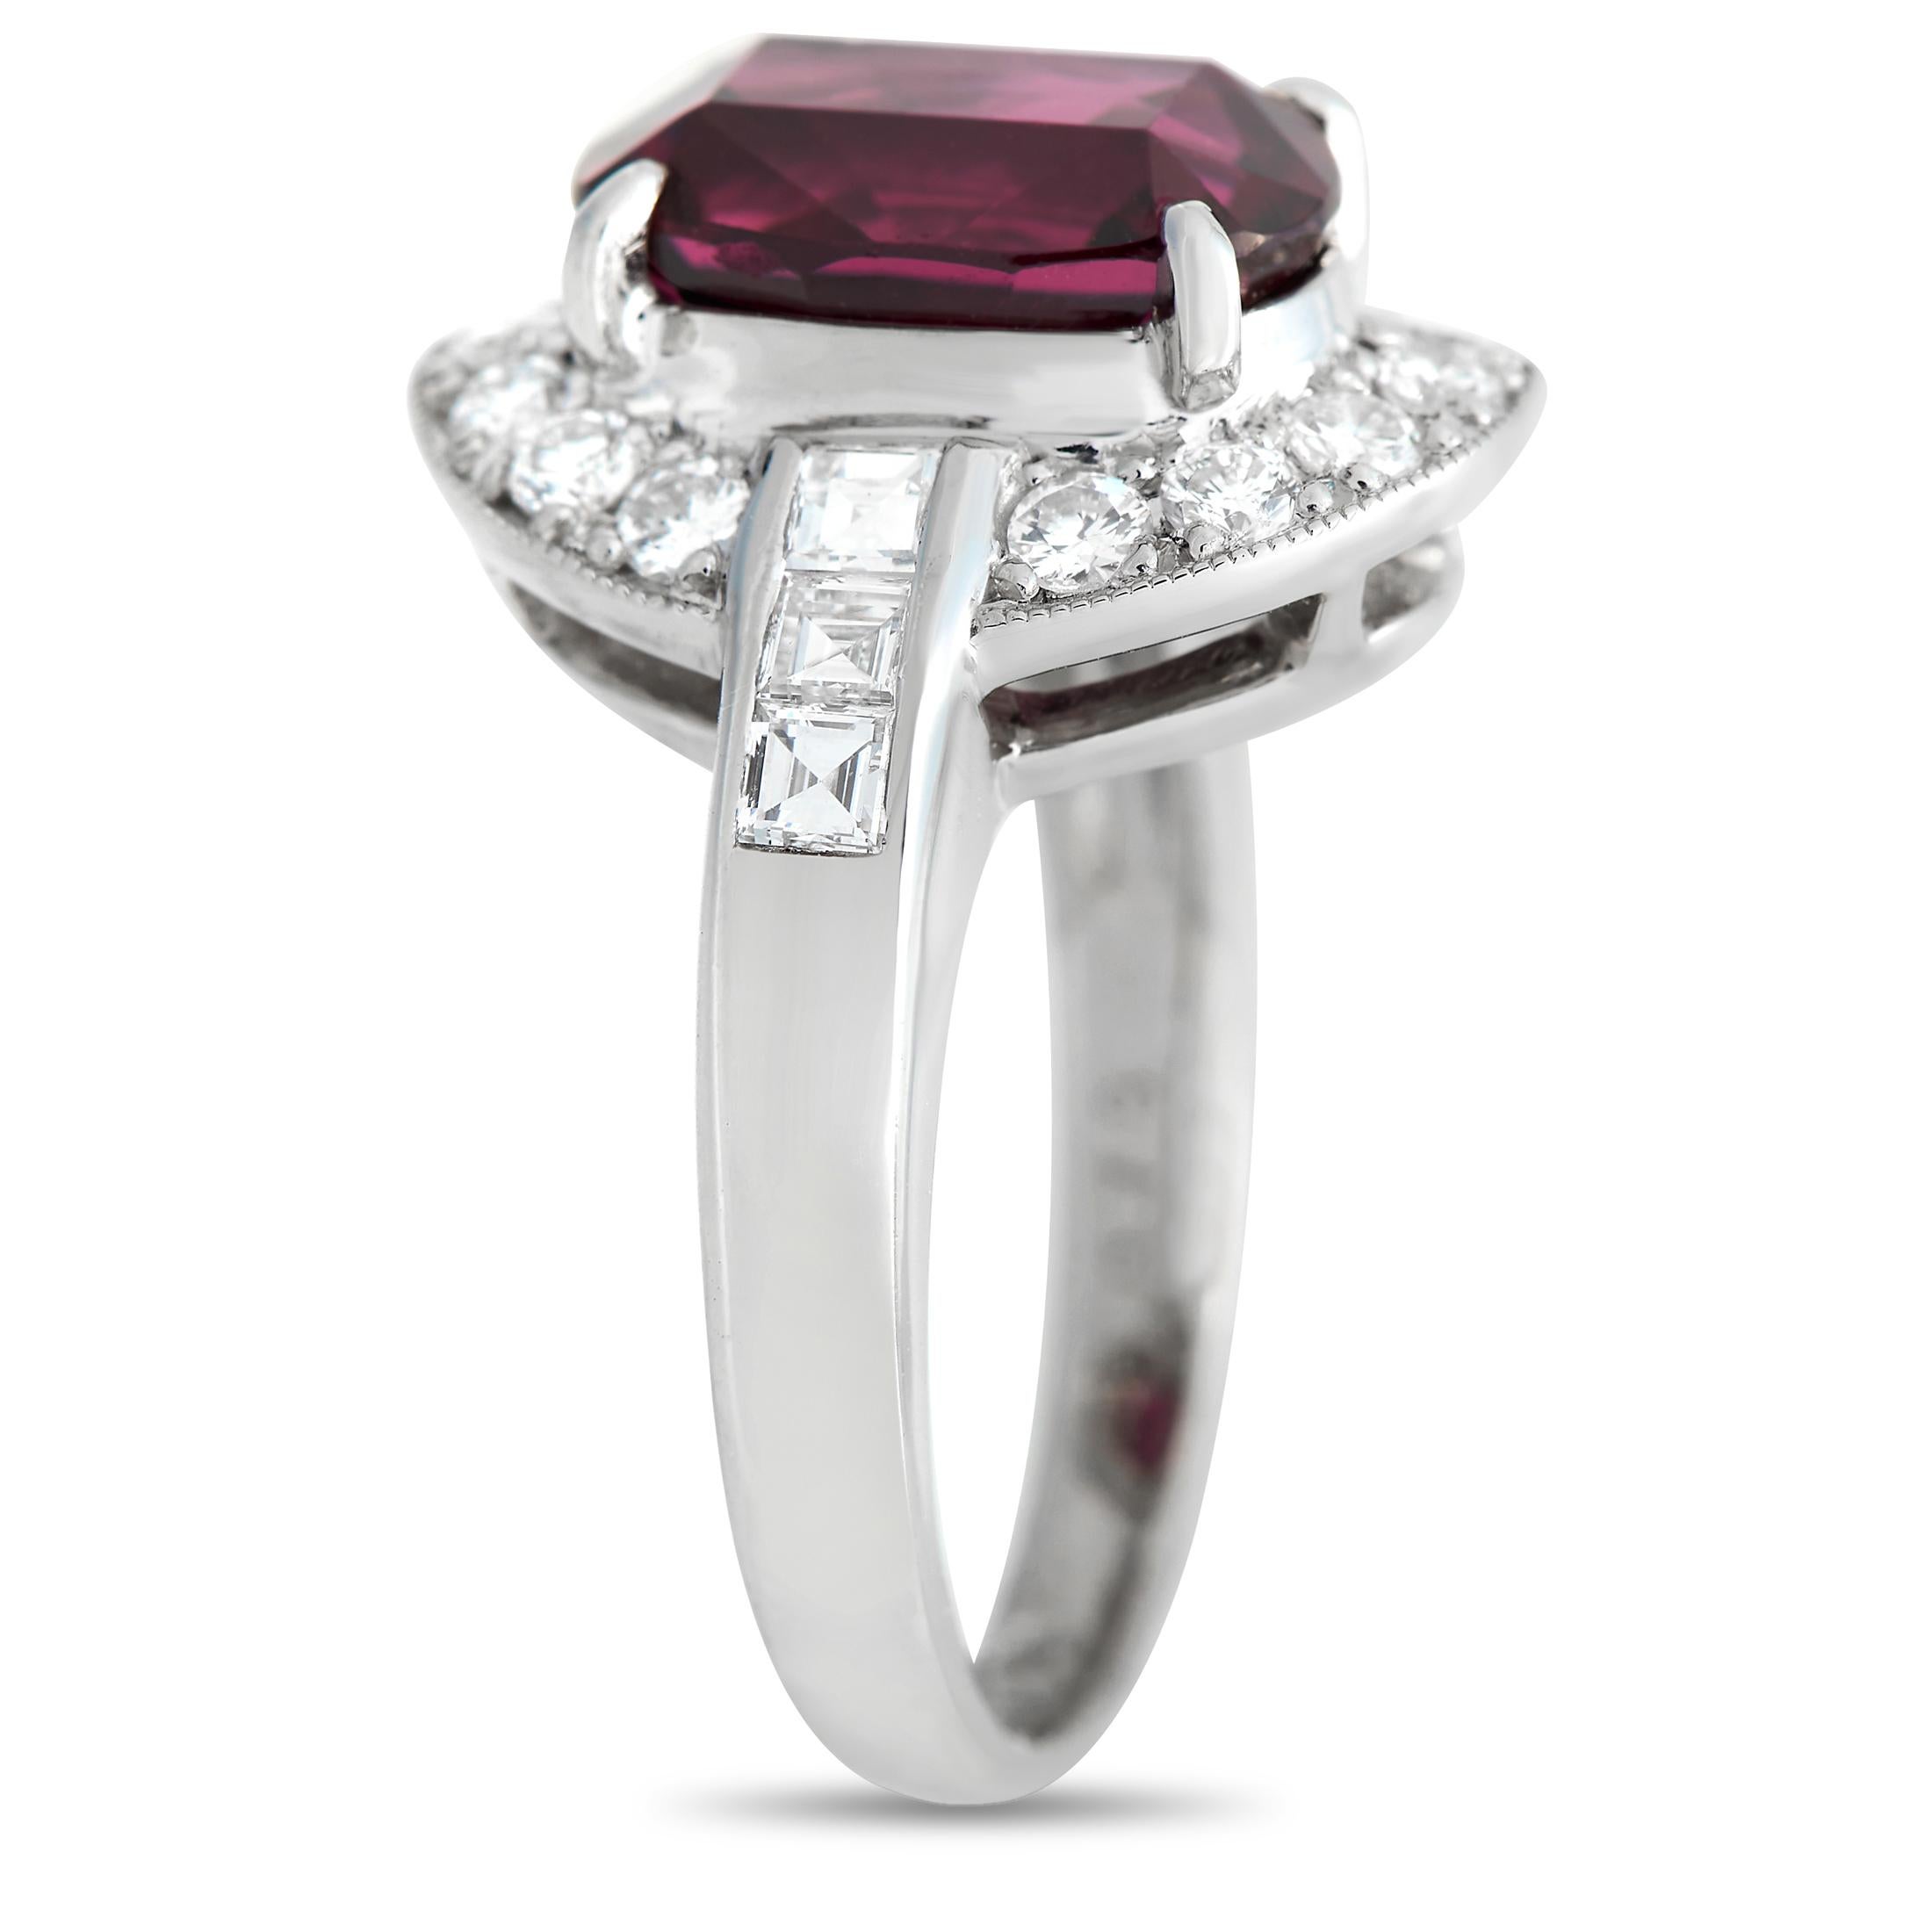 A 4.44 carat Rubellite gemstone makes a statement at the center of this impeccably crafted ring. Diamonds totaling 0.78 carats elevate the Platinum setting, which features a 3mm wide band and a top height measuring 7mm.\r\nThis jewelry piece is